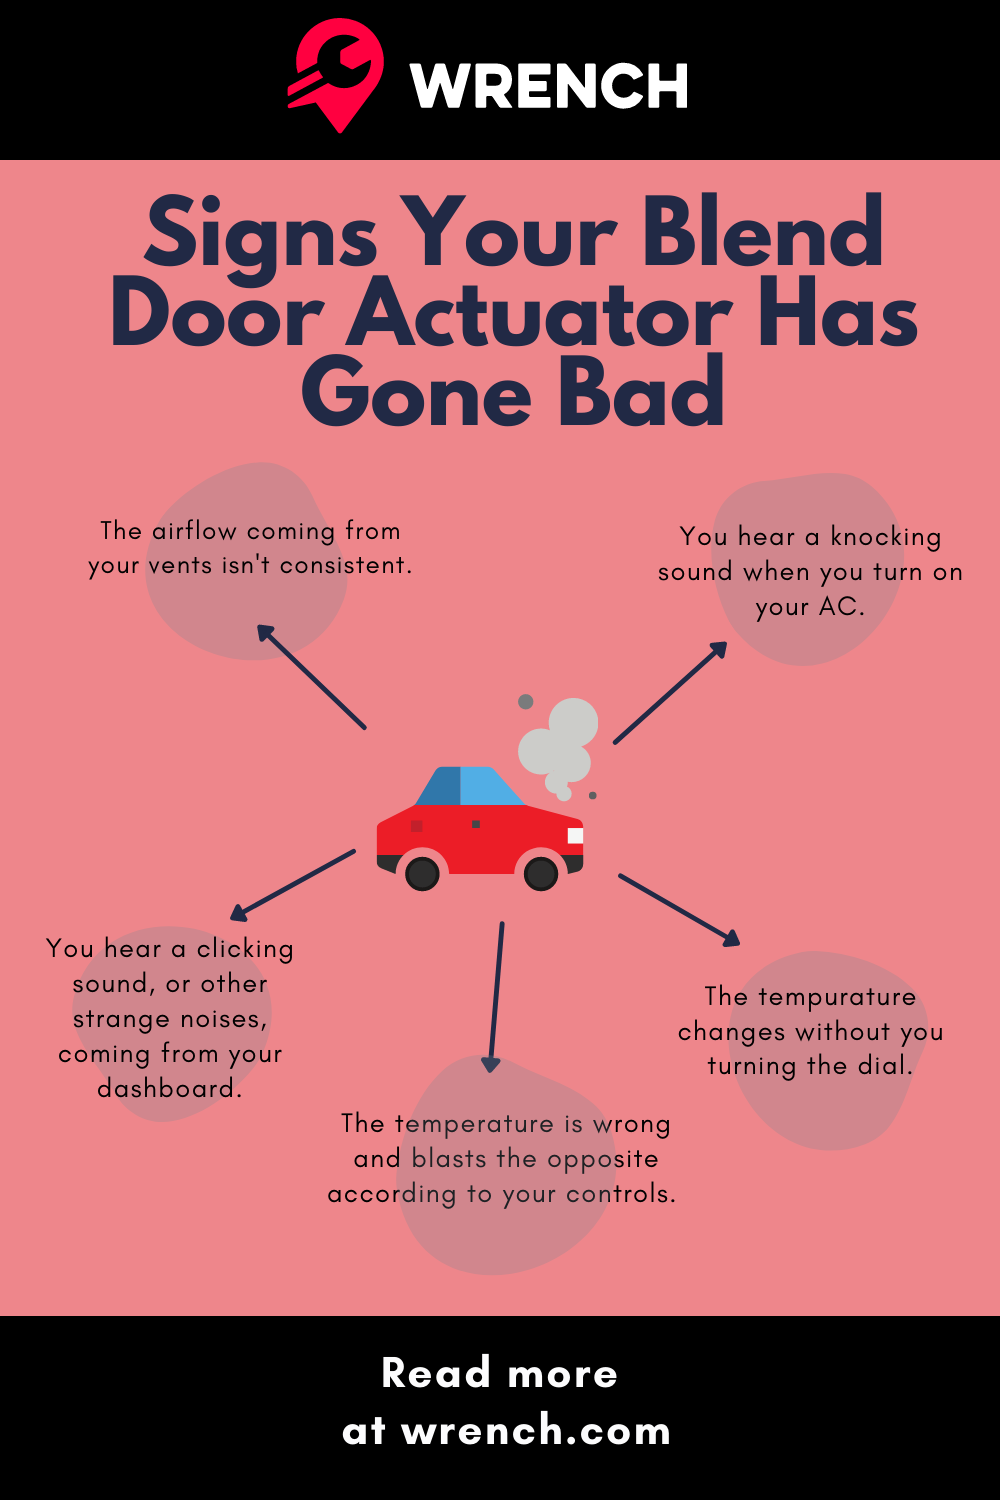 How To Fix A Blend Door What Is A Blend Door Actuator And How Do I Know If I Need A New One?